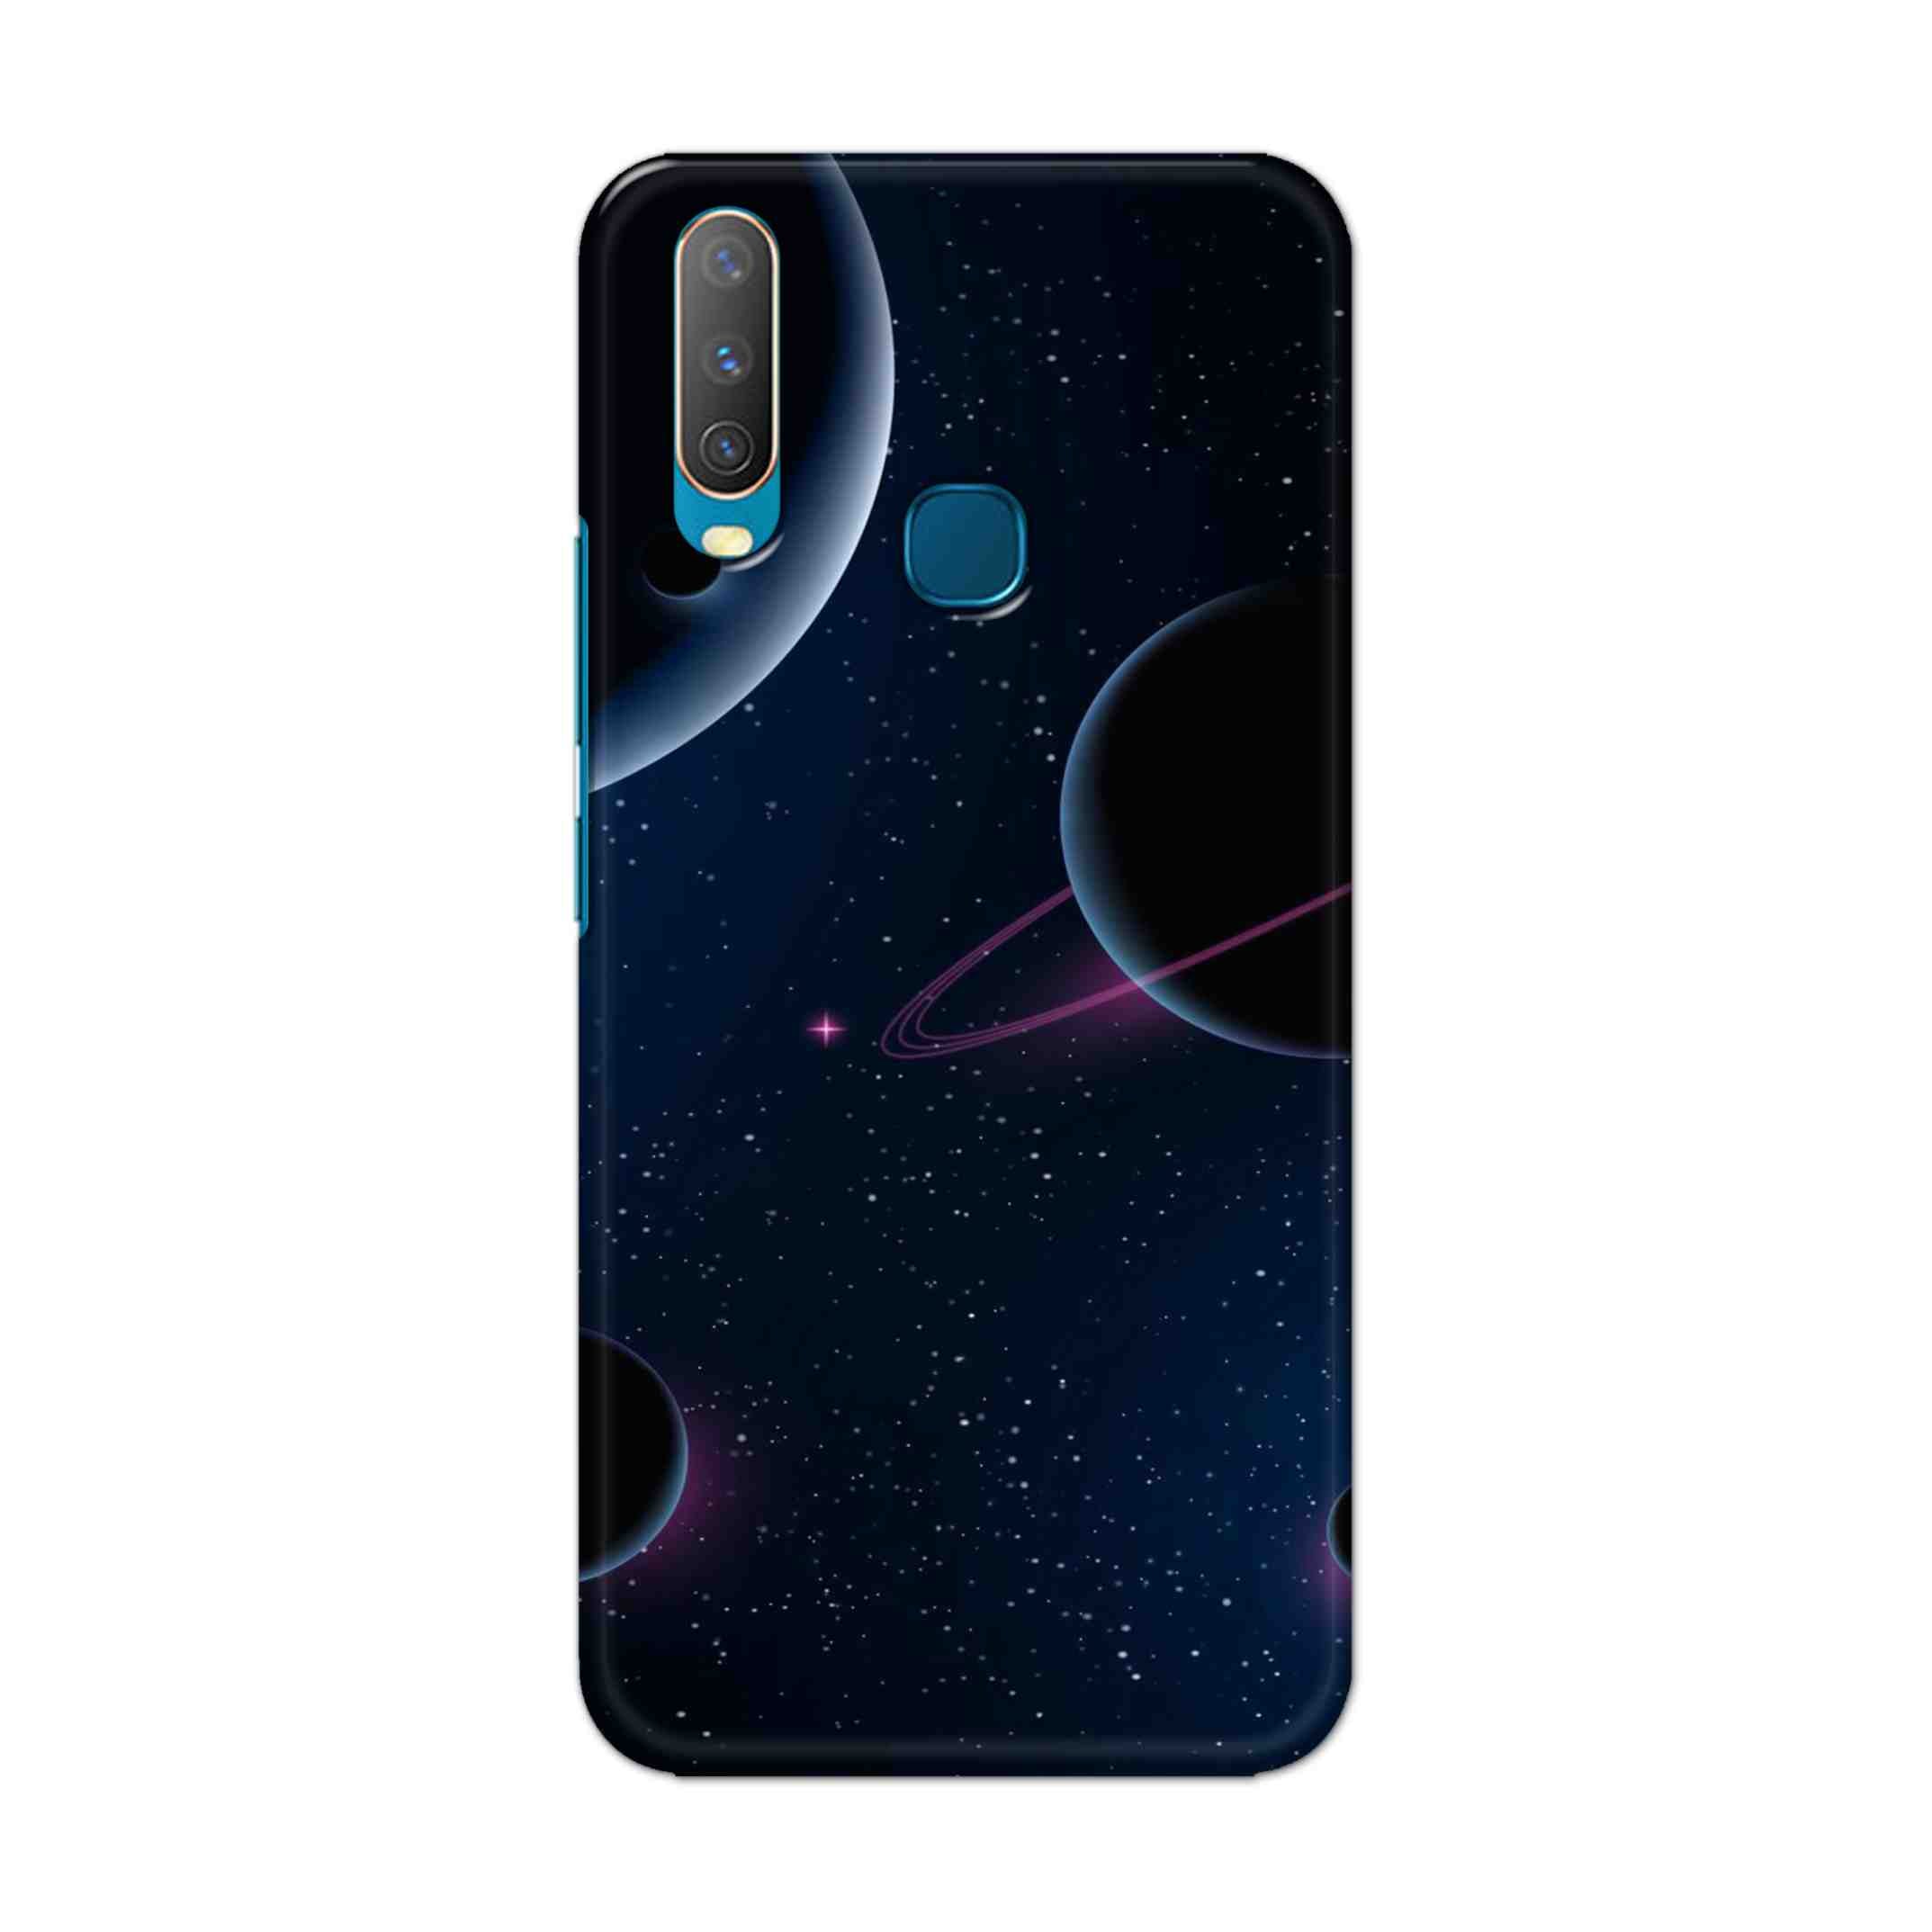 Buy Night Space Hard Back Mobile Phone Case Cover For Vivo Y17 / U10 Online